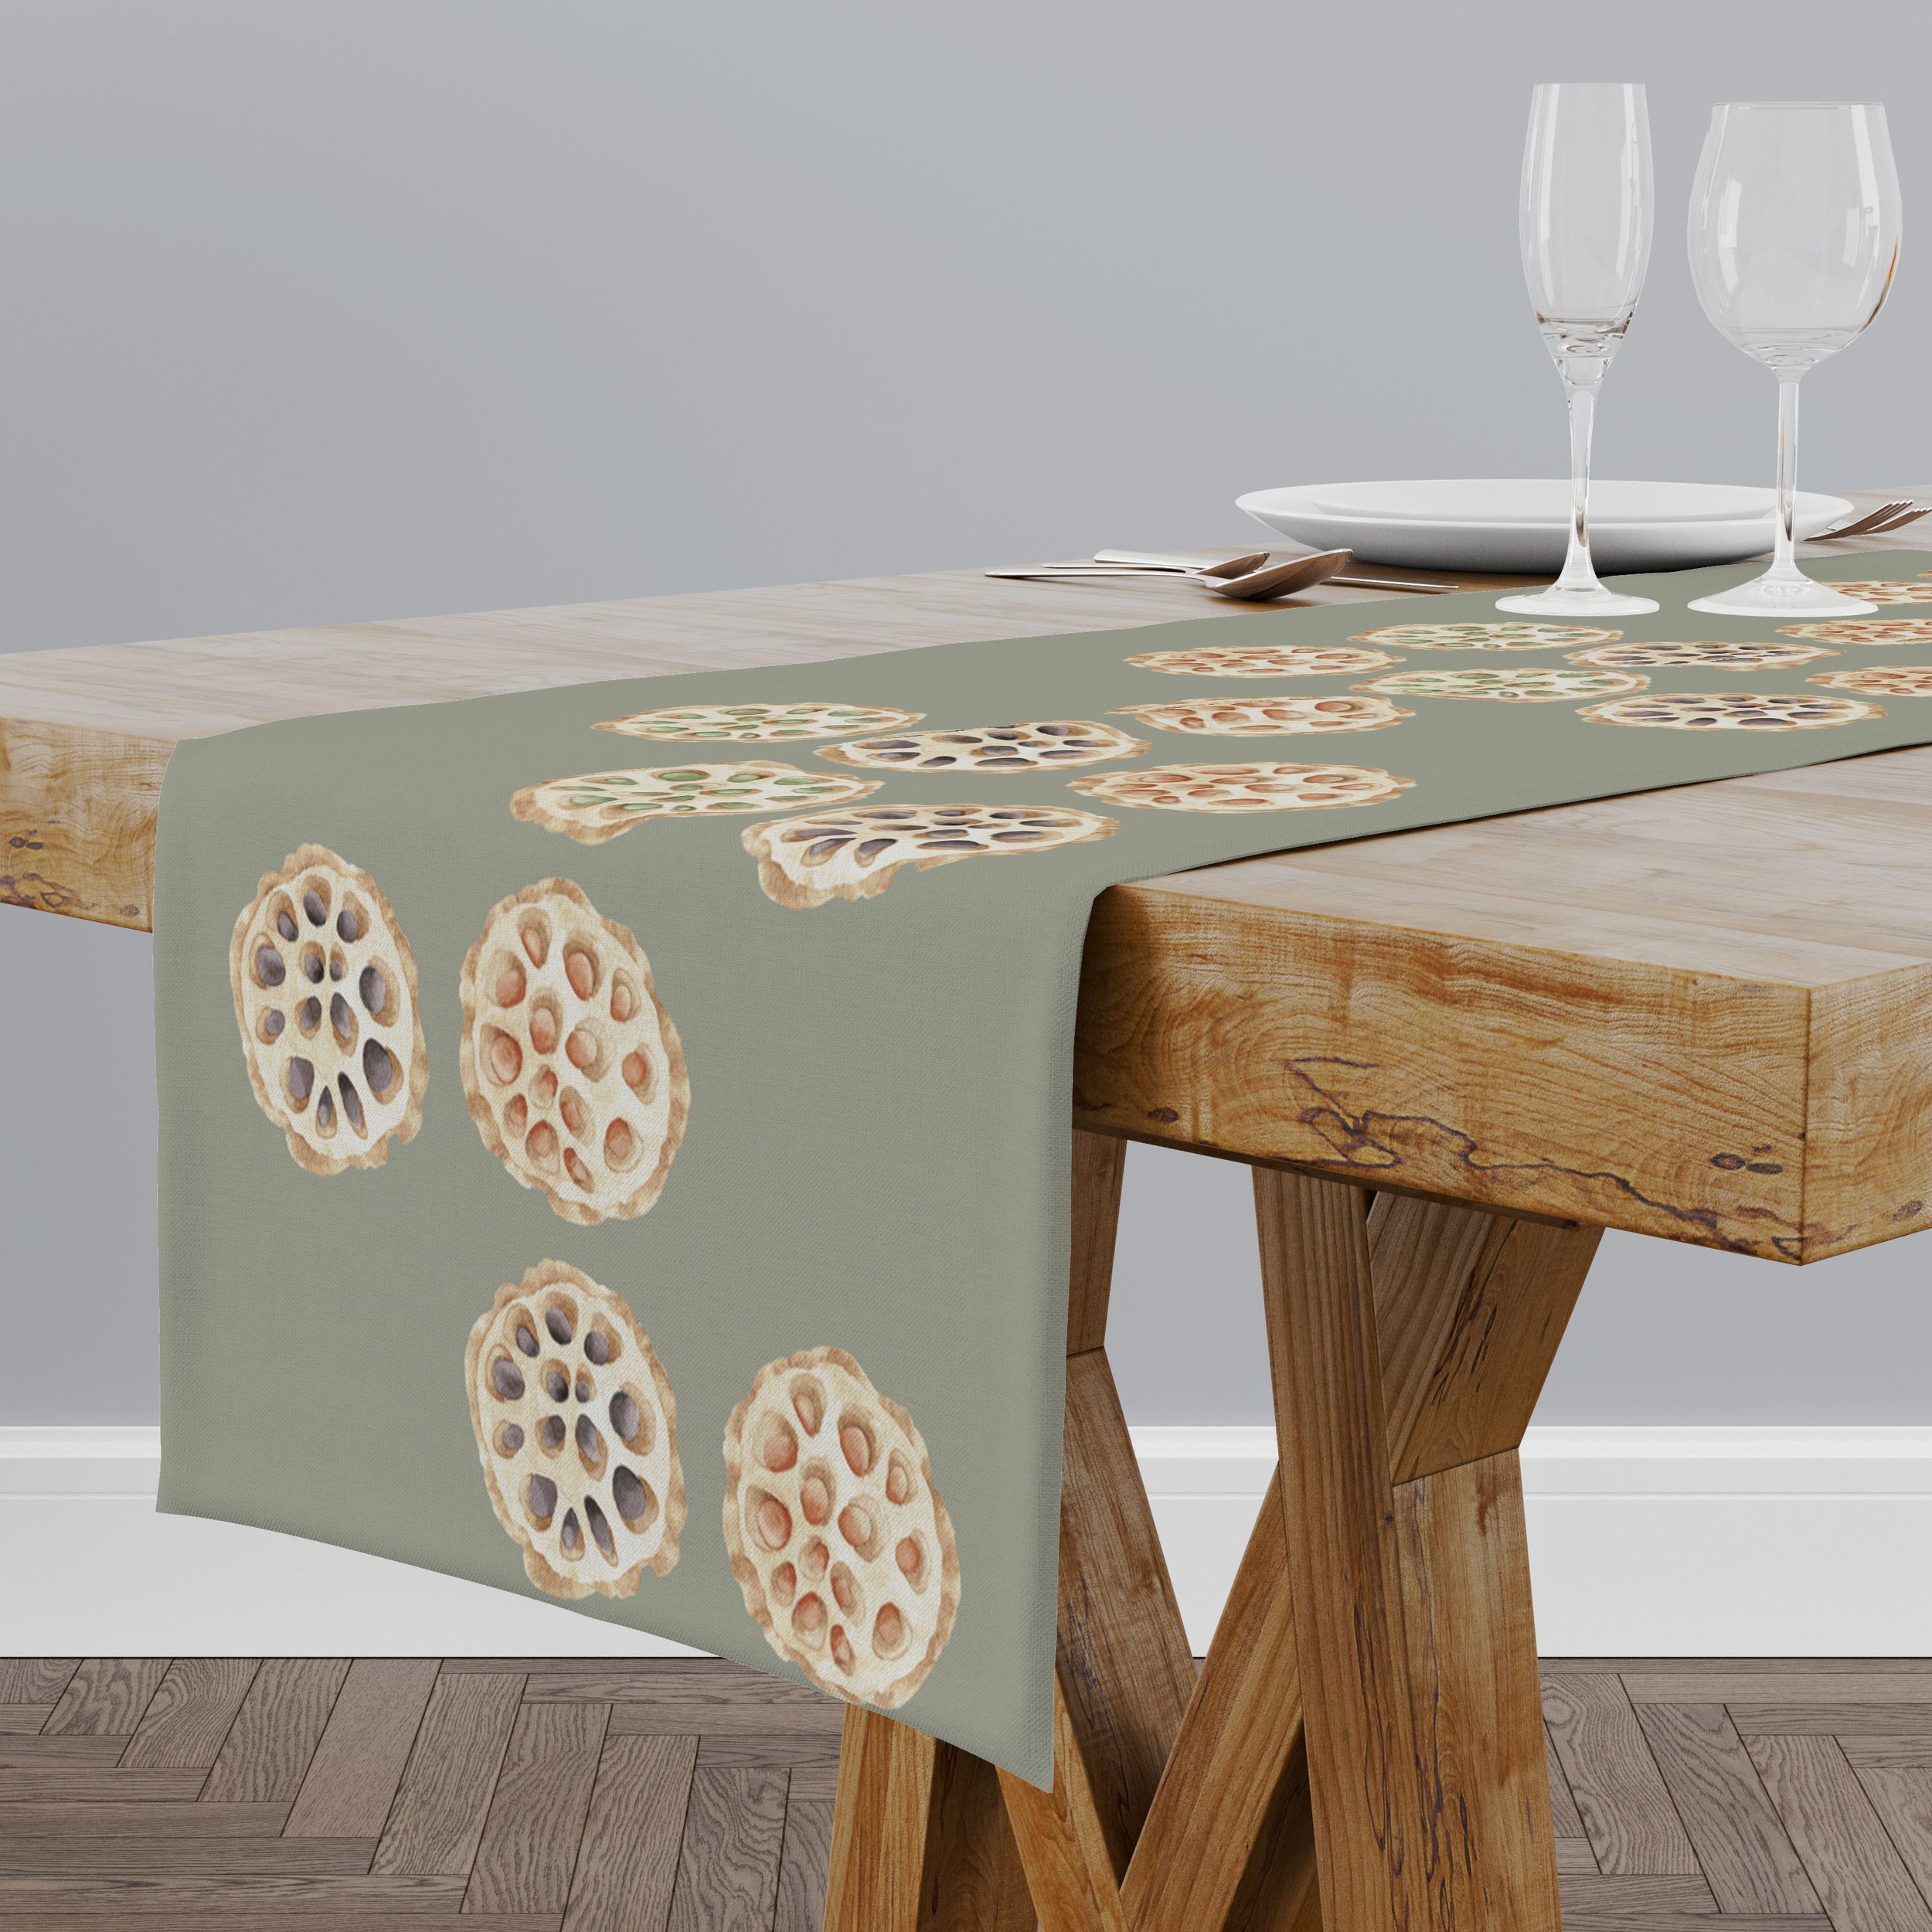 Lotus Seed Pods on Sage Table Runner